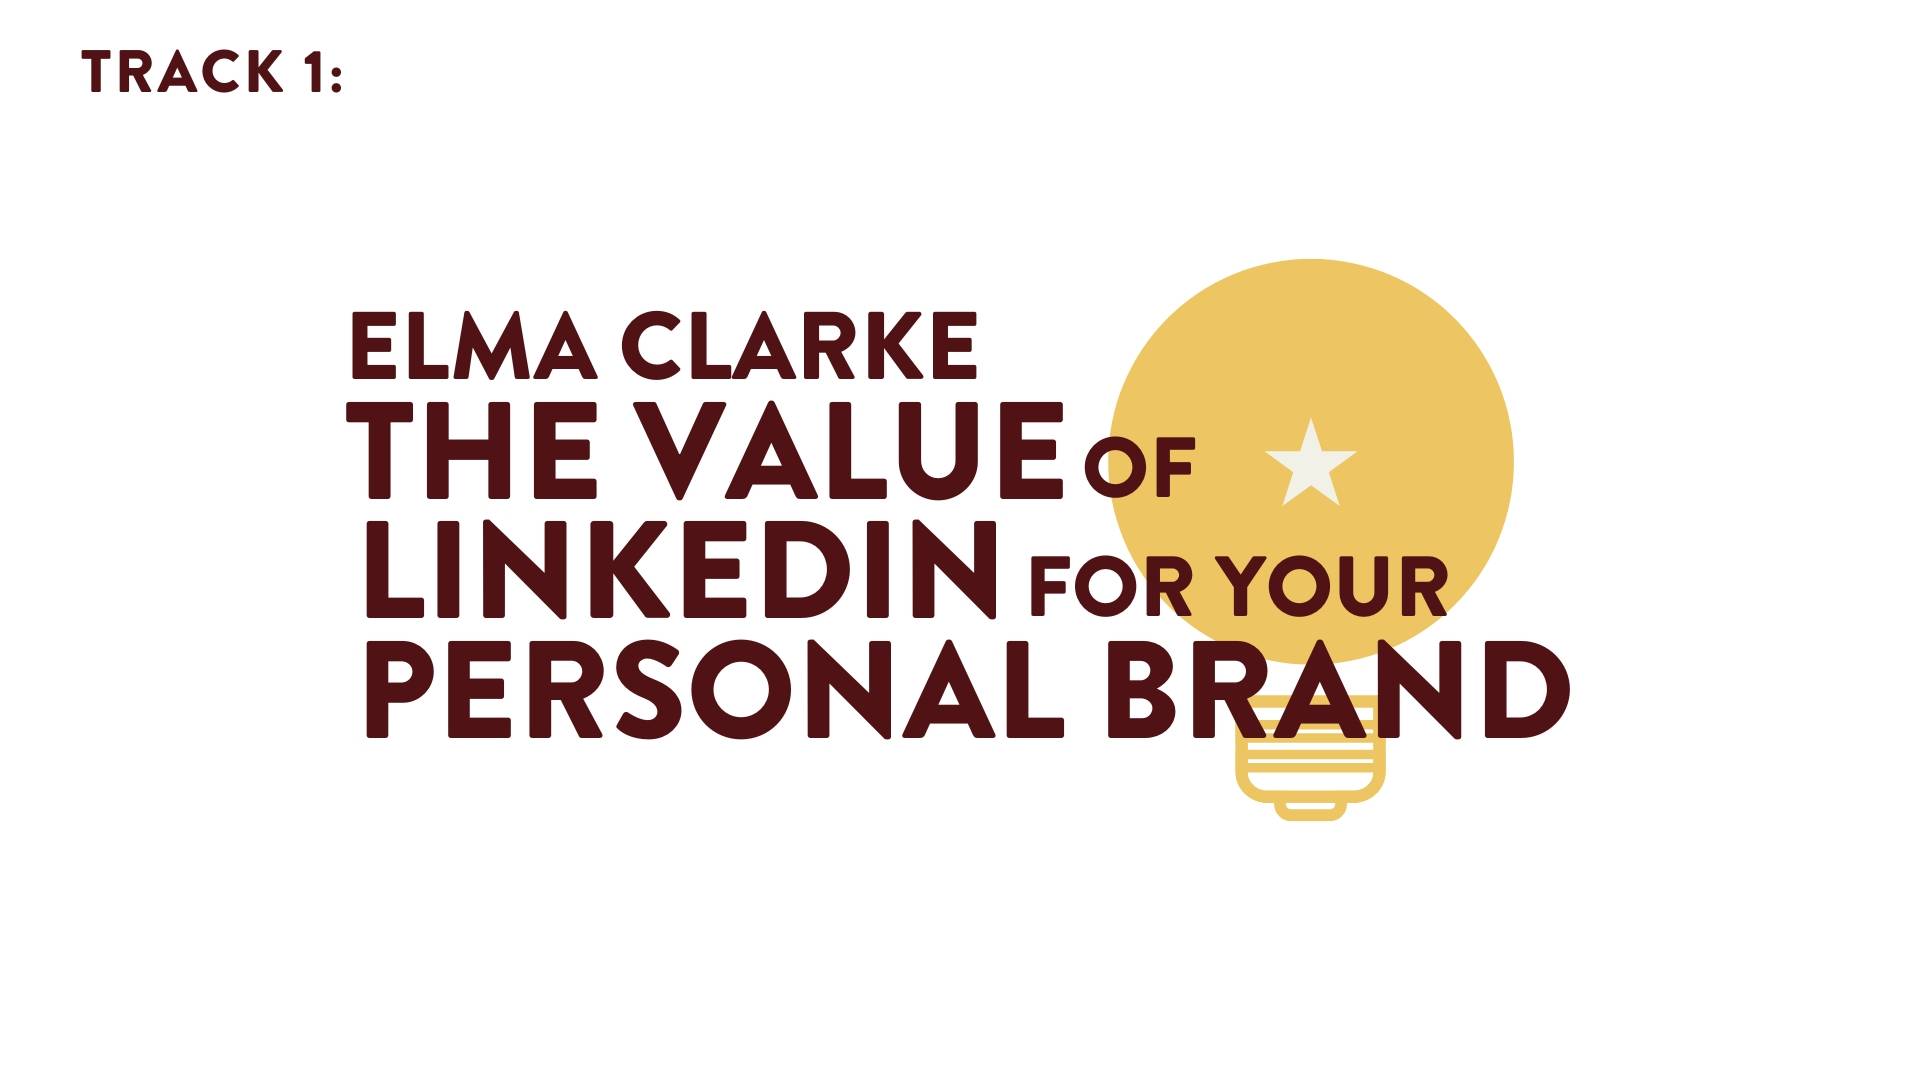 The Value of LinkedIn for your Personal Brand